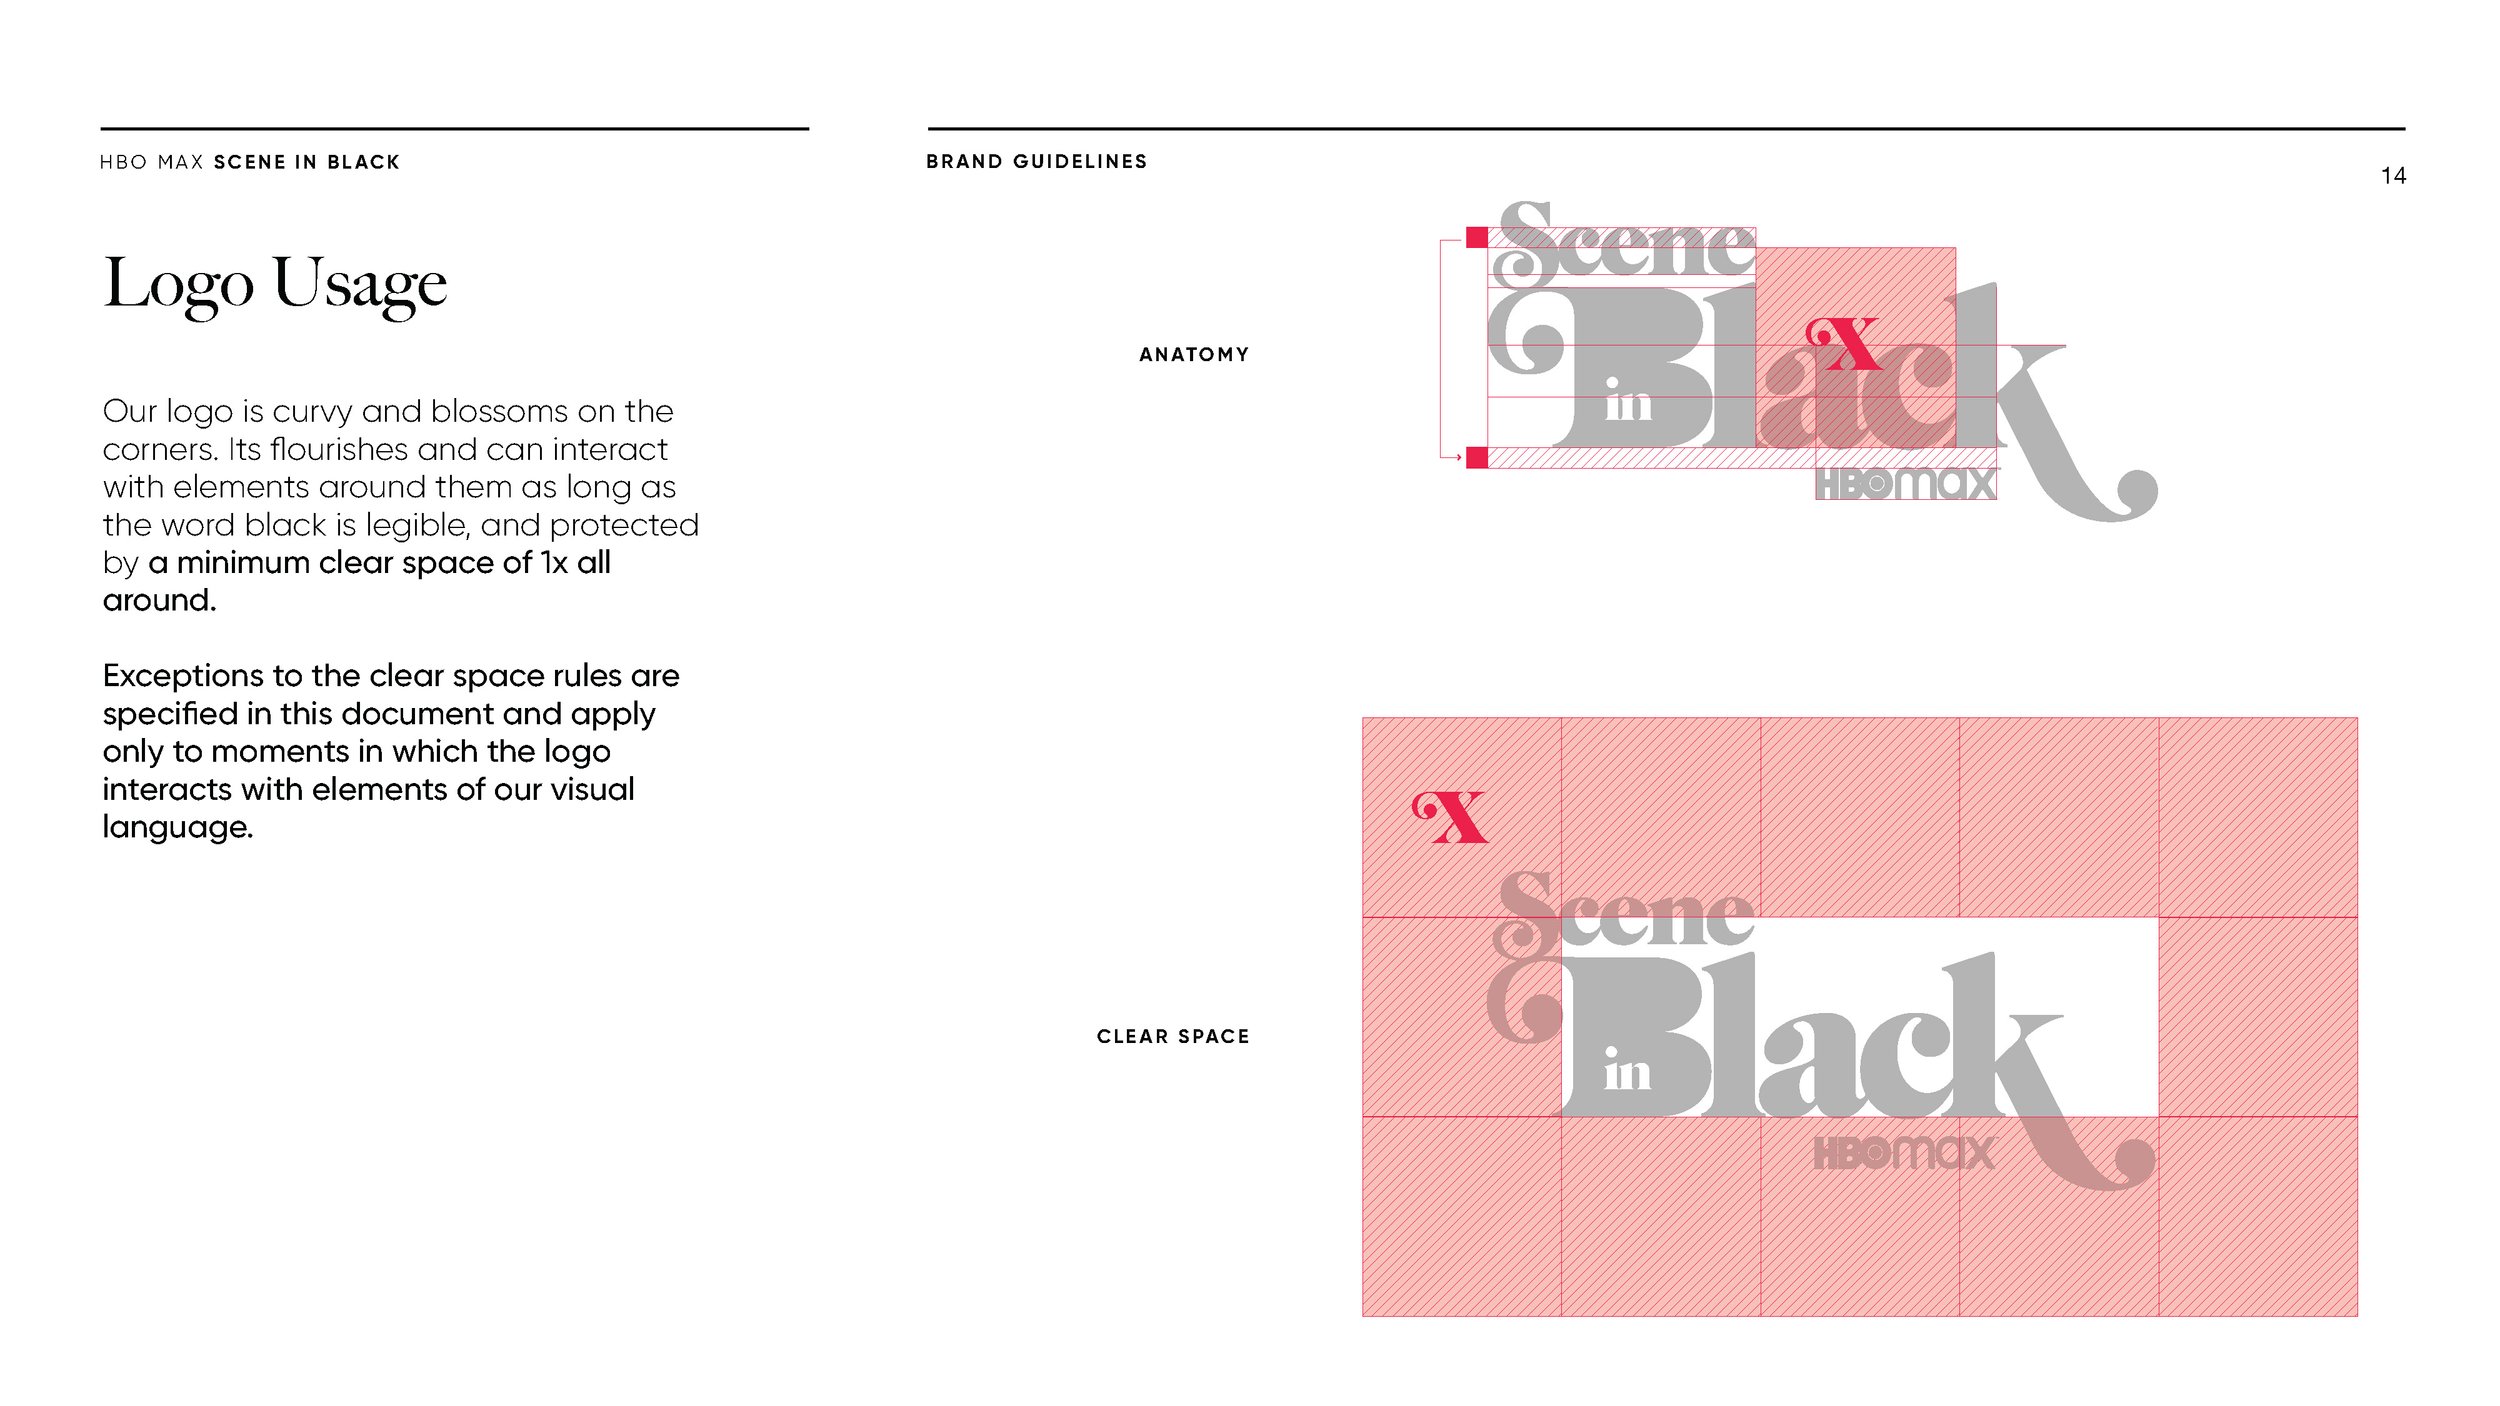 HBOMax_SceneinBlack | Brand Guidelines | Final Oct21_Page_14.jpg